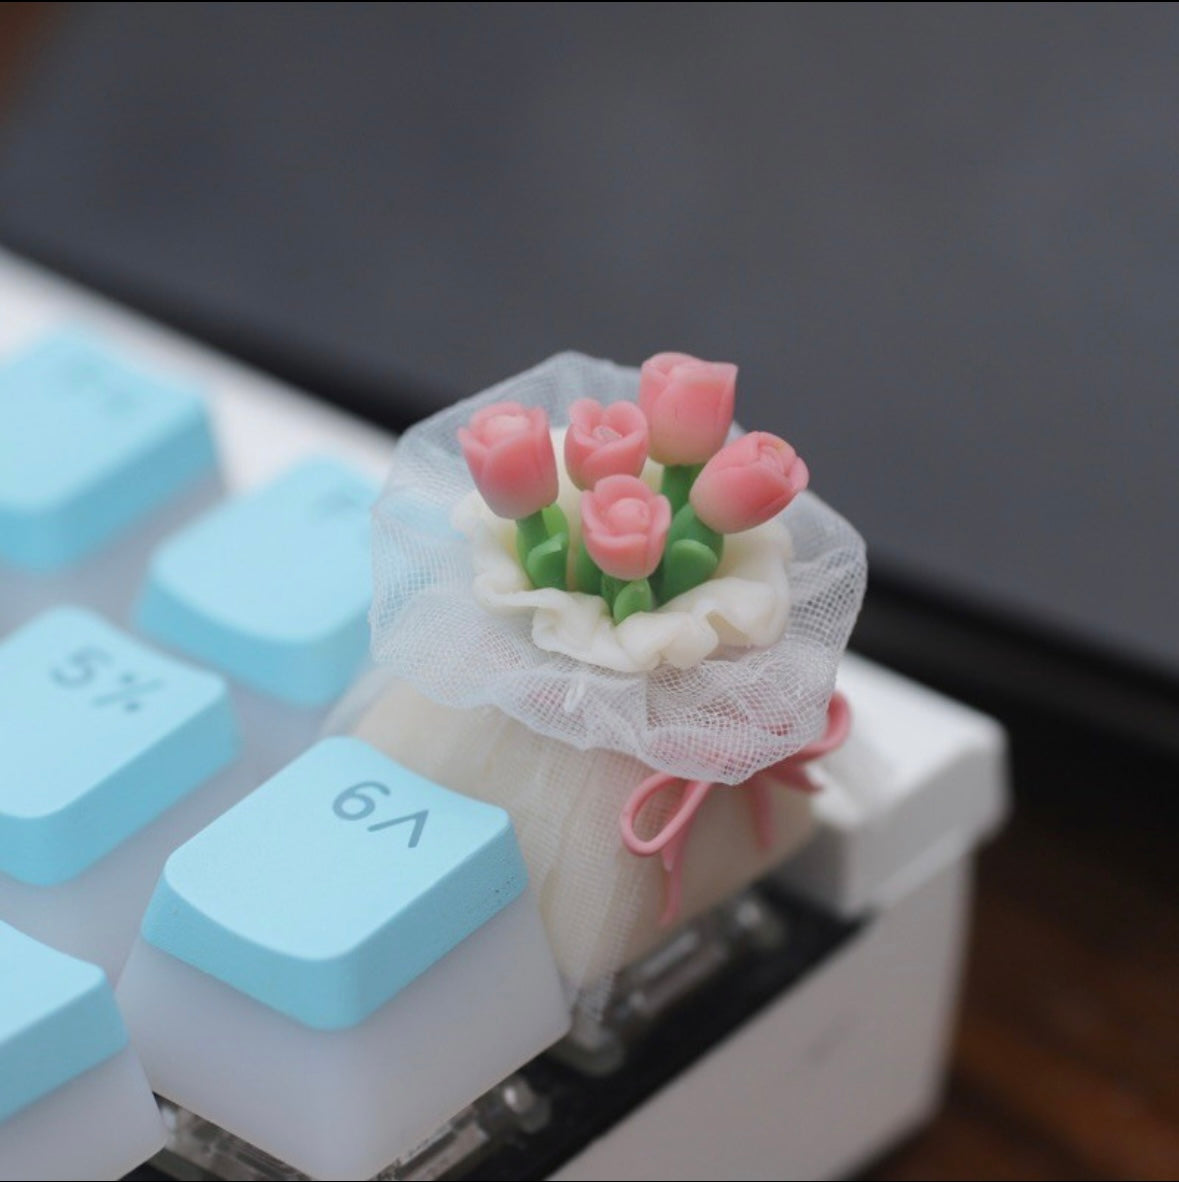 🎨 Artistry in Every Petal: Our artisans pour their skill into each petal, creating a masterpiece that goes beyond mere keys. The keycaps become a canvas, and your keyboard transforms into a garden of artistry.